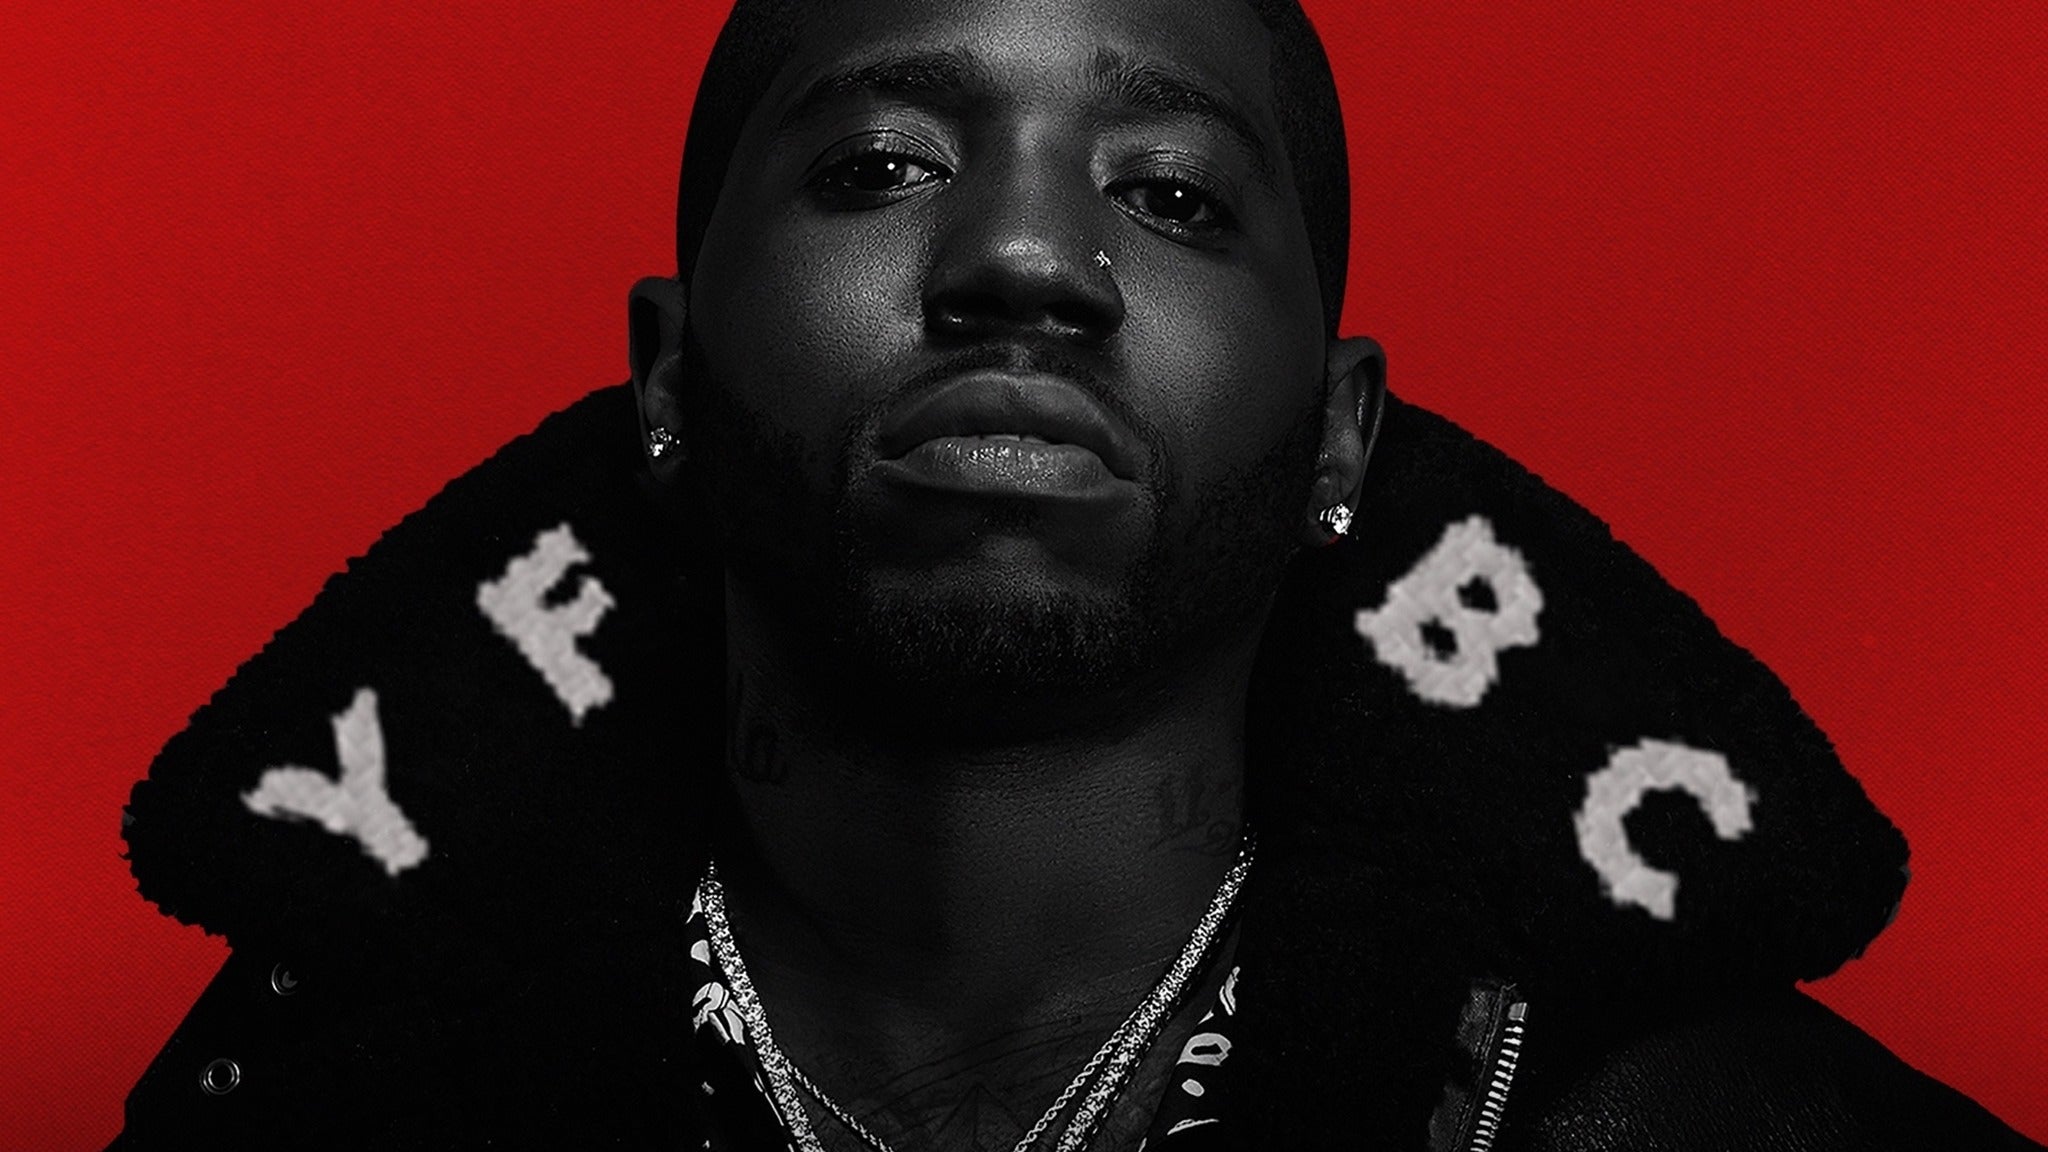 Blackout Entertainment LLC Presents YFN Lucci in North Myrtle Beach promo photo for Live Nation Mobile App presale offer code